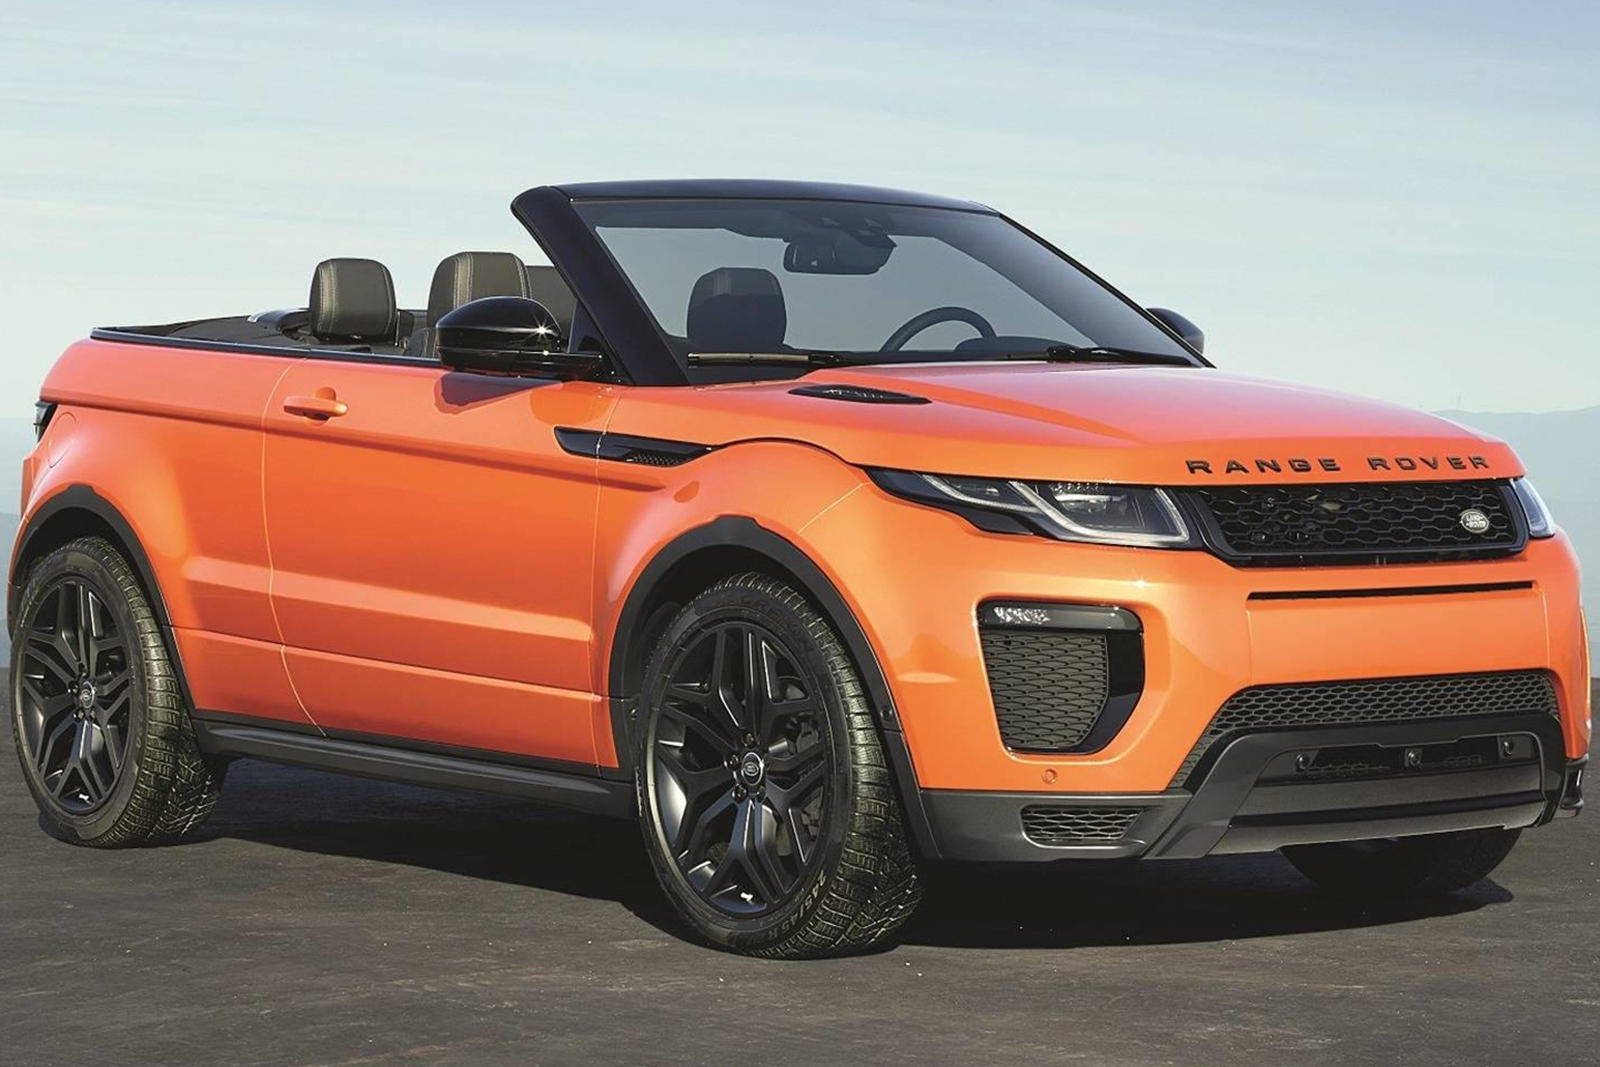 2019 Land Rover Range Rover Evoque Convertible Review, Trims, Specs and